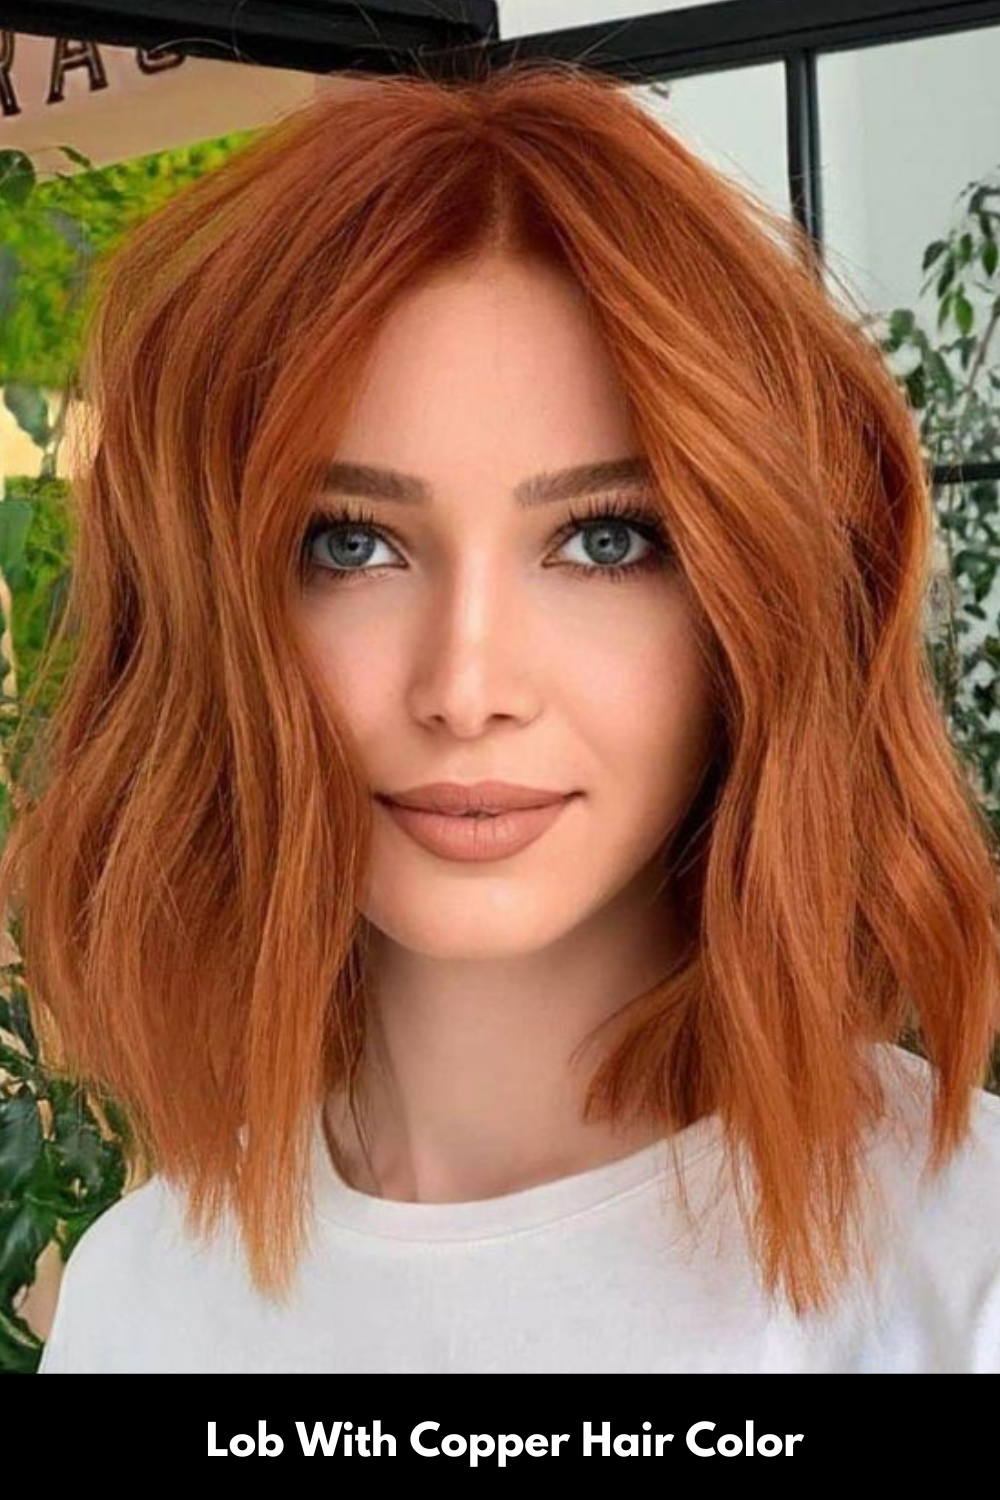 lob-with-copper-hair-color